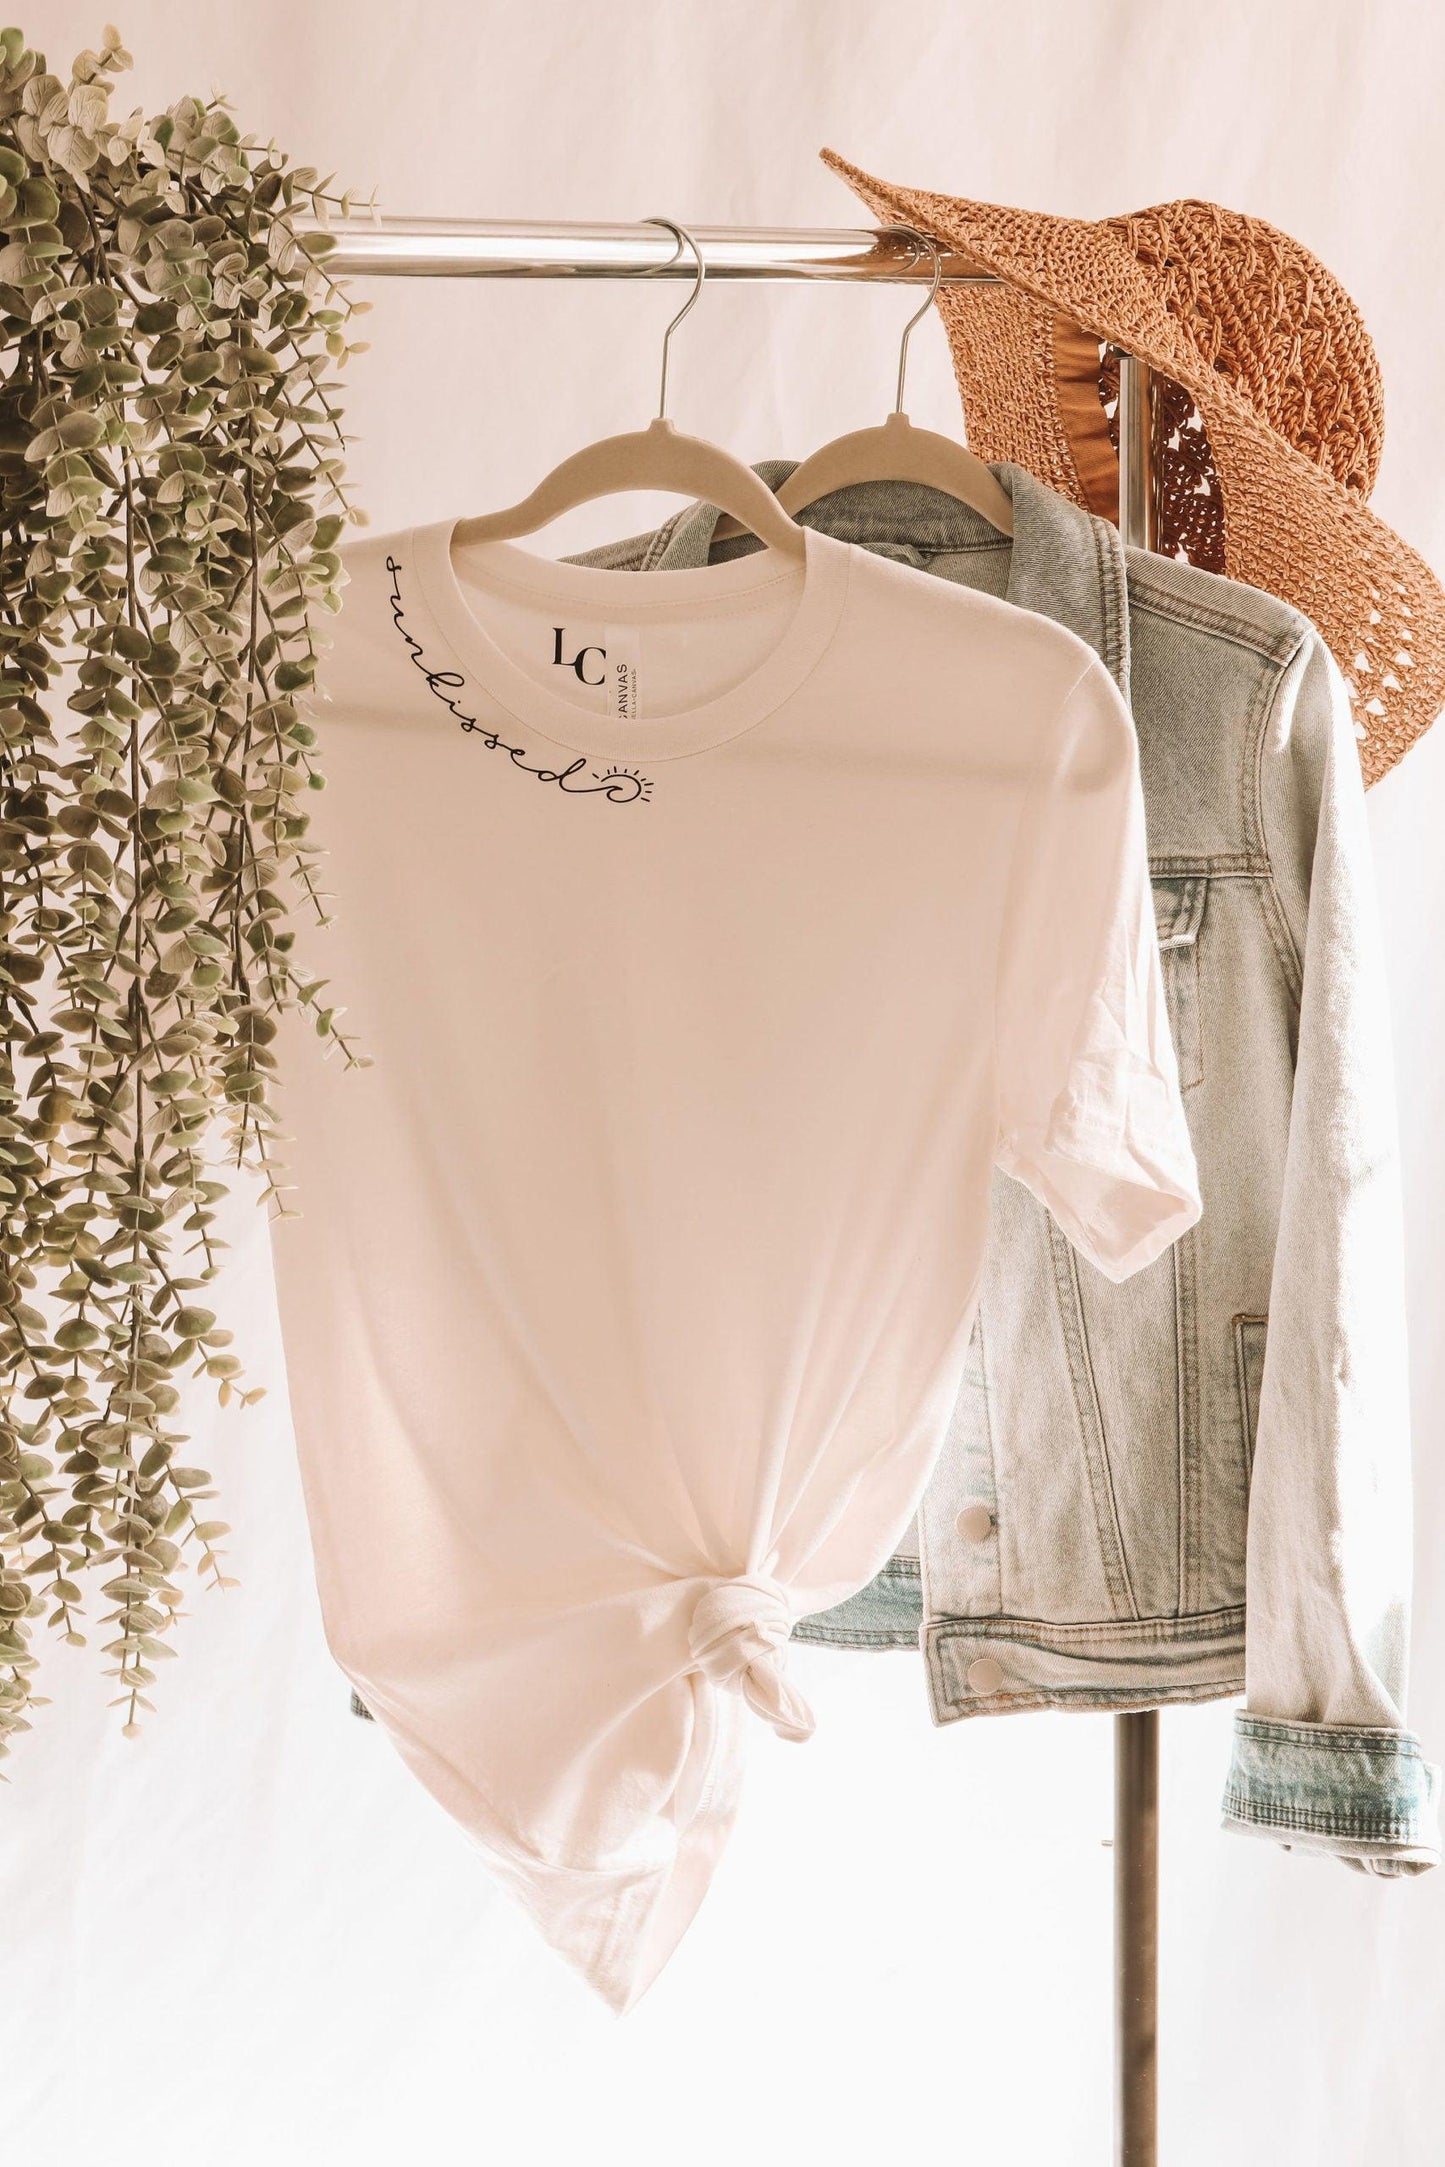 A white short sleeve t-shirt with sunkissed written in script text along the neckline. there's a wave and a sun in the script. The shirt is knotted at the bottom for styling. It's hanging on a clothing rack with a jean jacket, straw hat and vines.